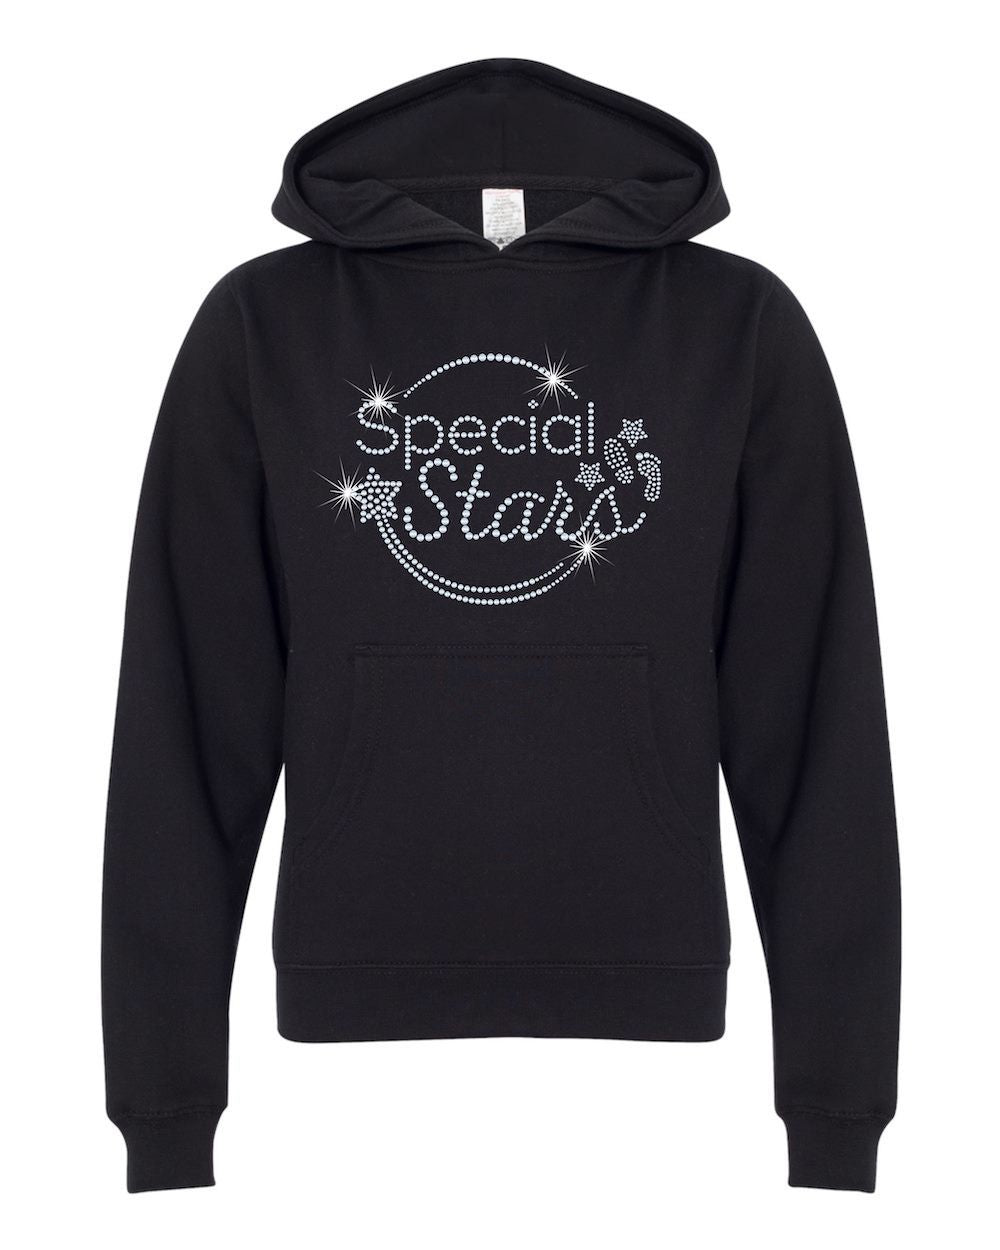 Special Stars Hooded Sweatshirt Youth and Adult Sizes SAOD